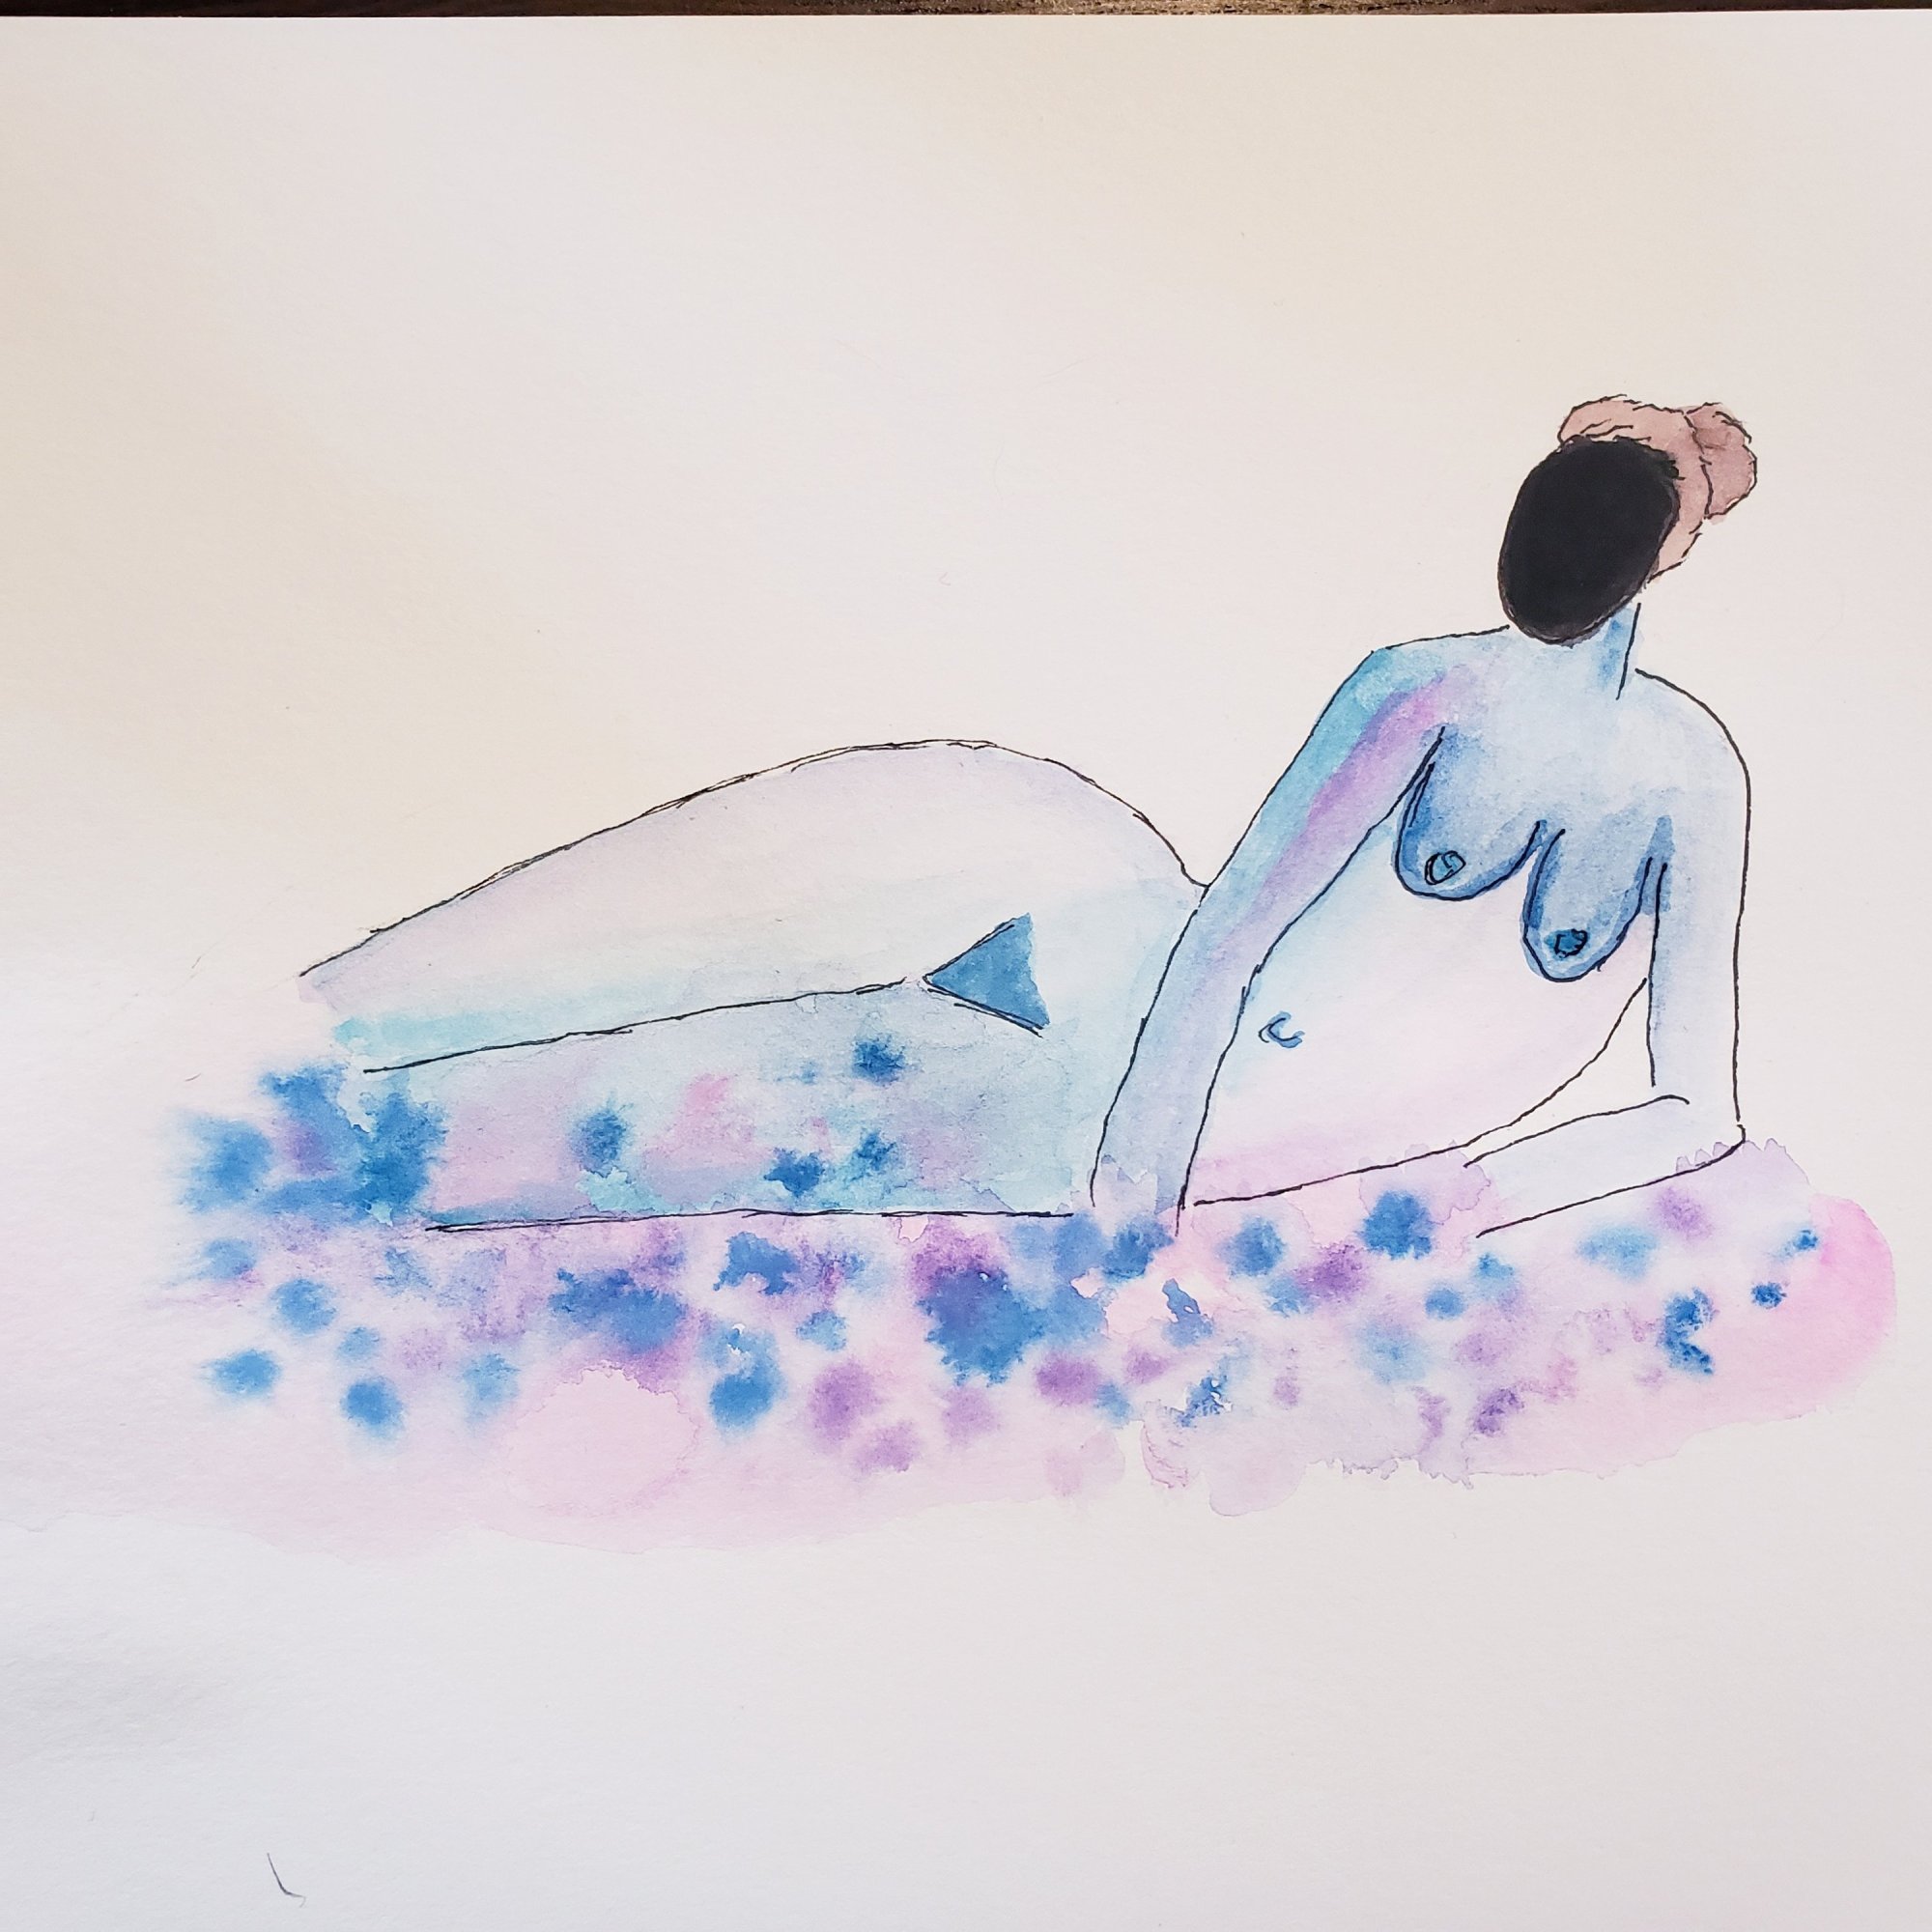 Prone woman in pastels with blackened out face